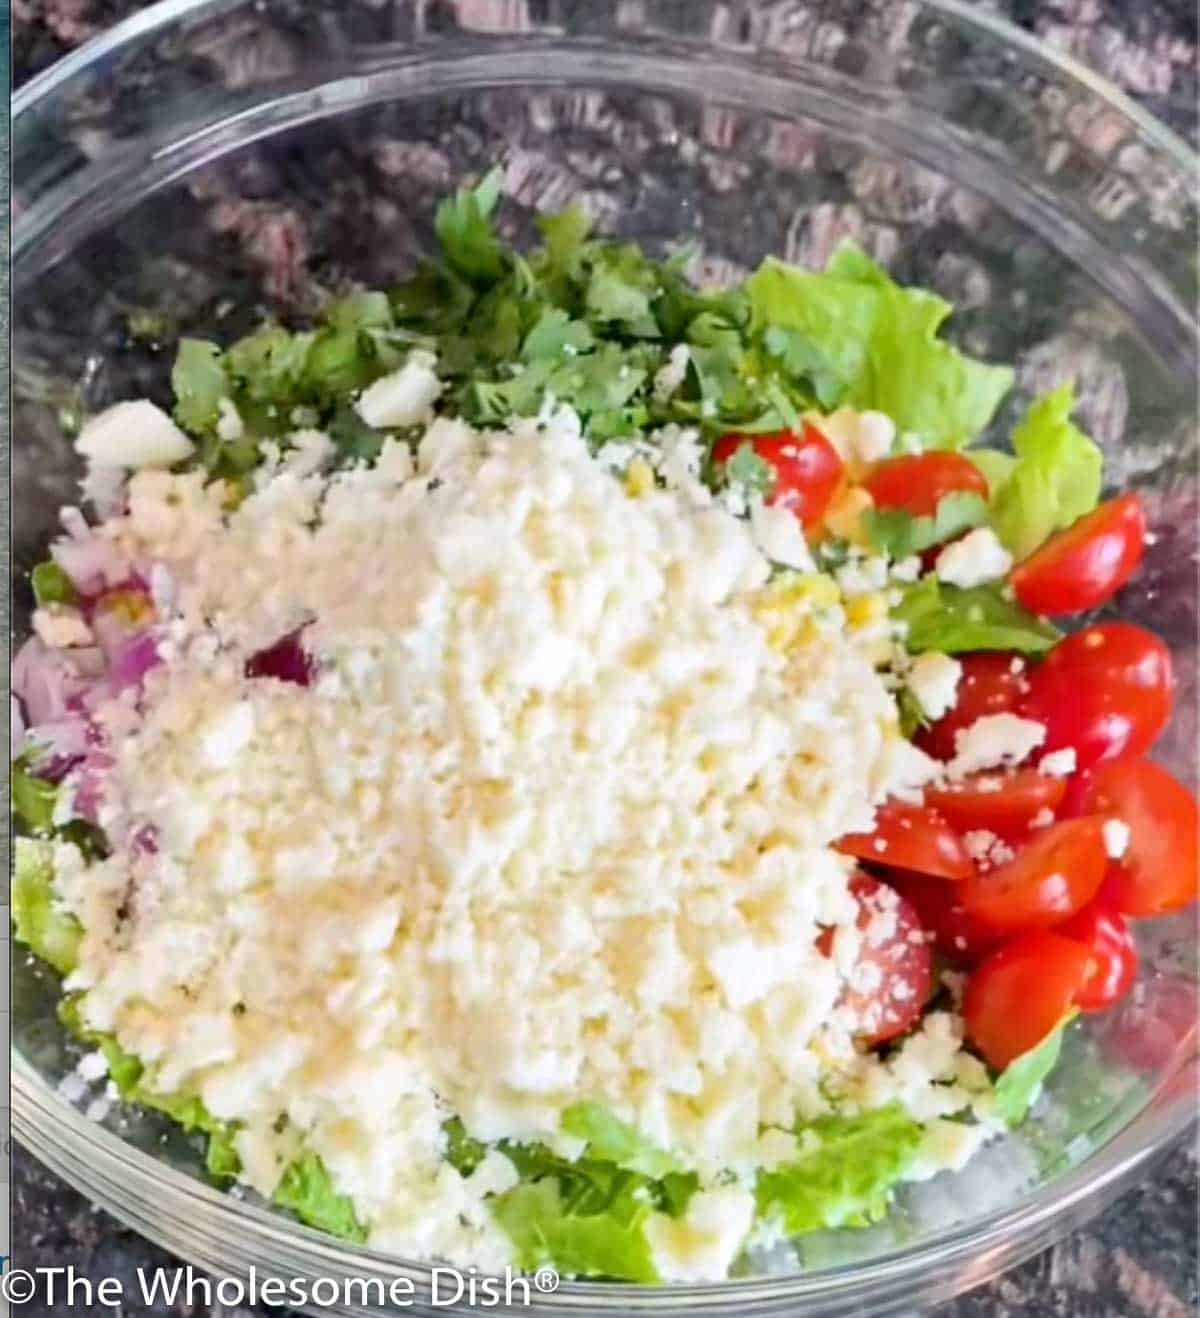 Adding crumbled cotija cheese to a salad.